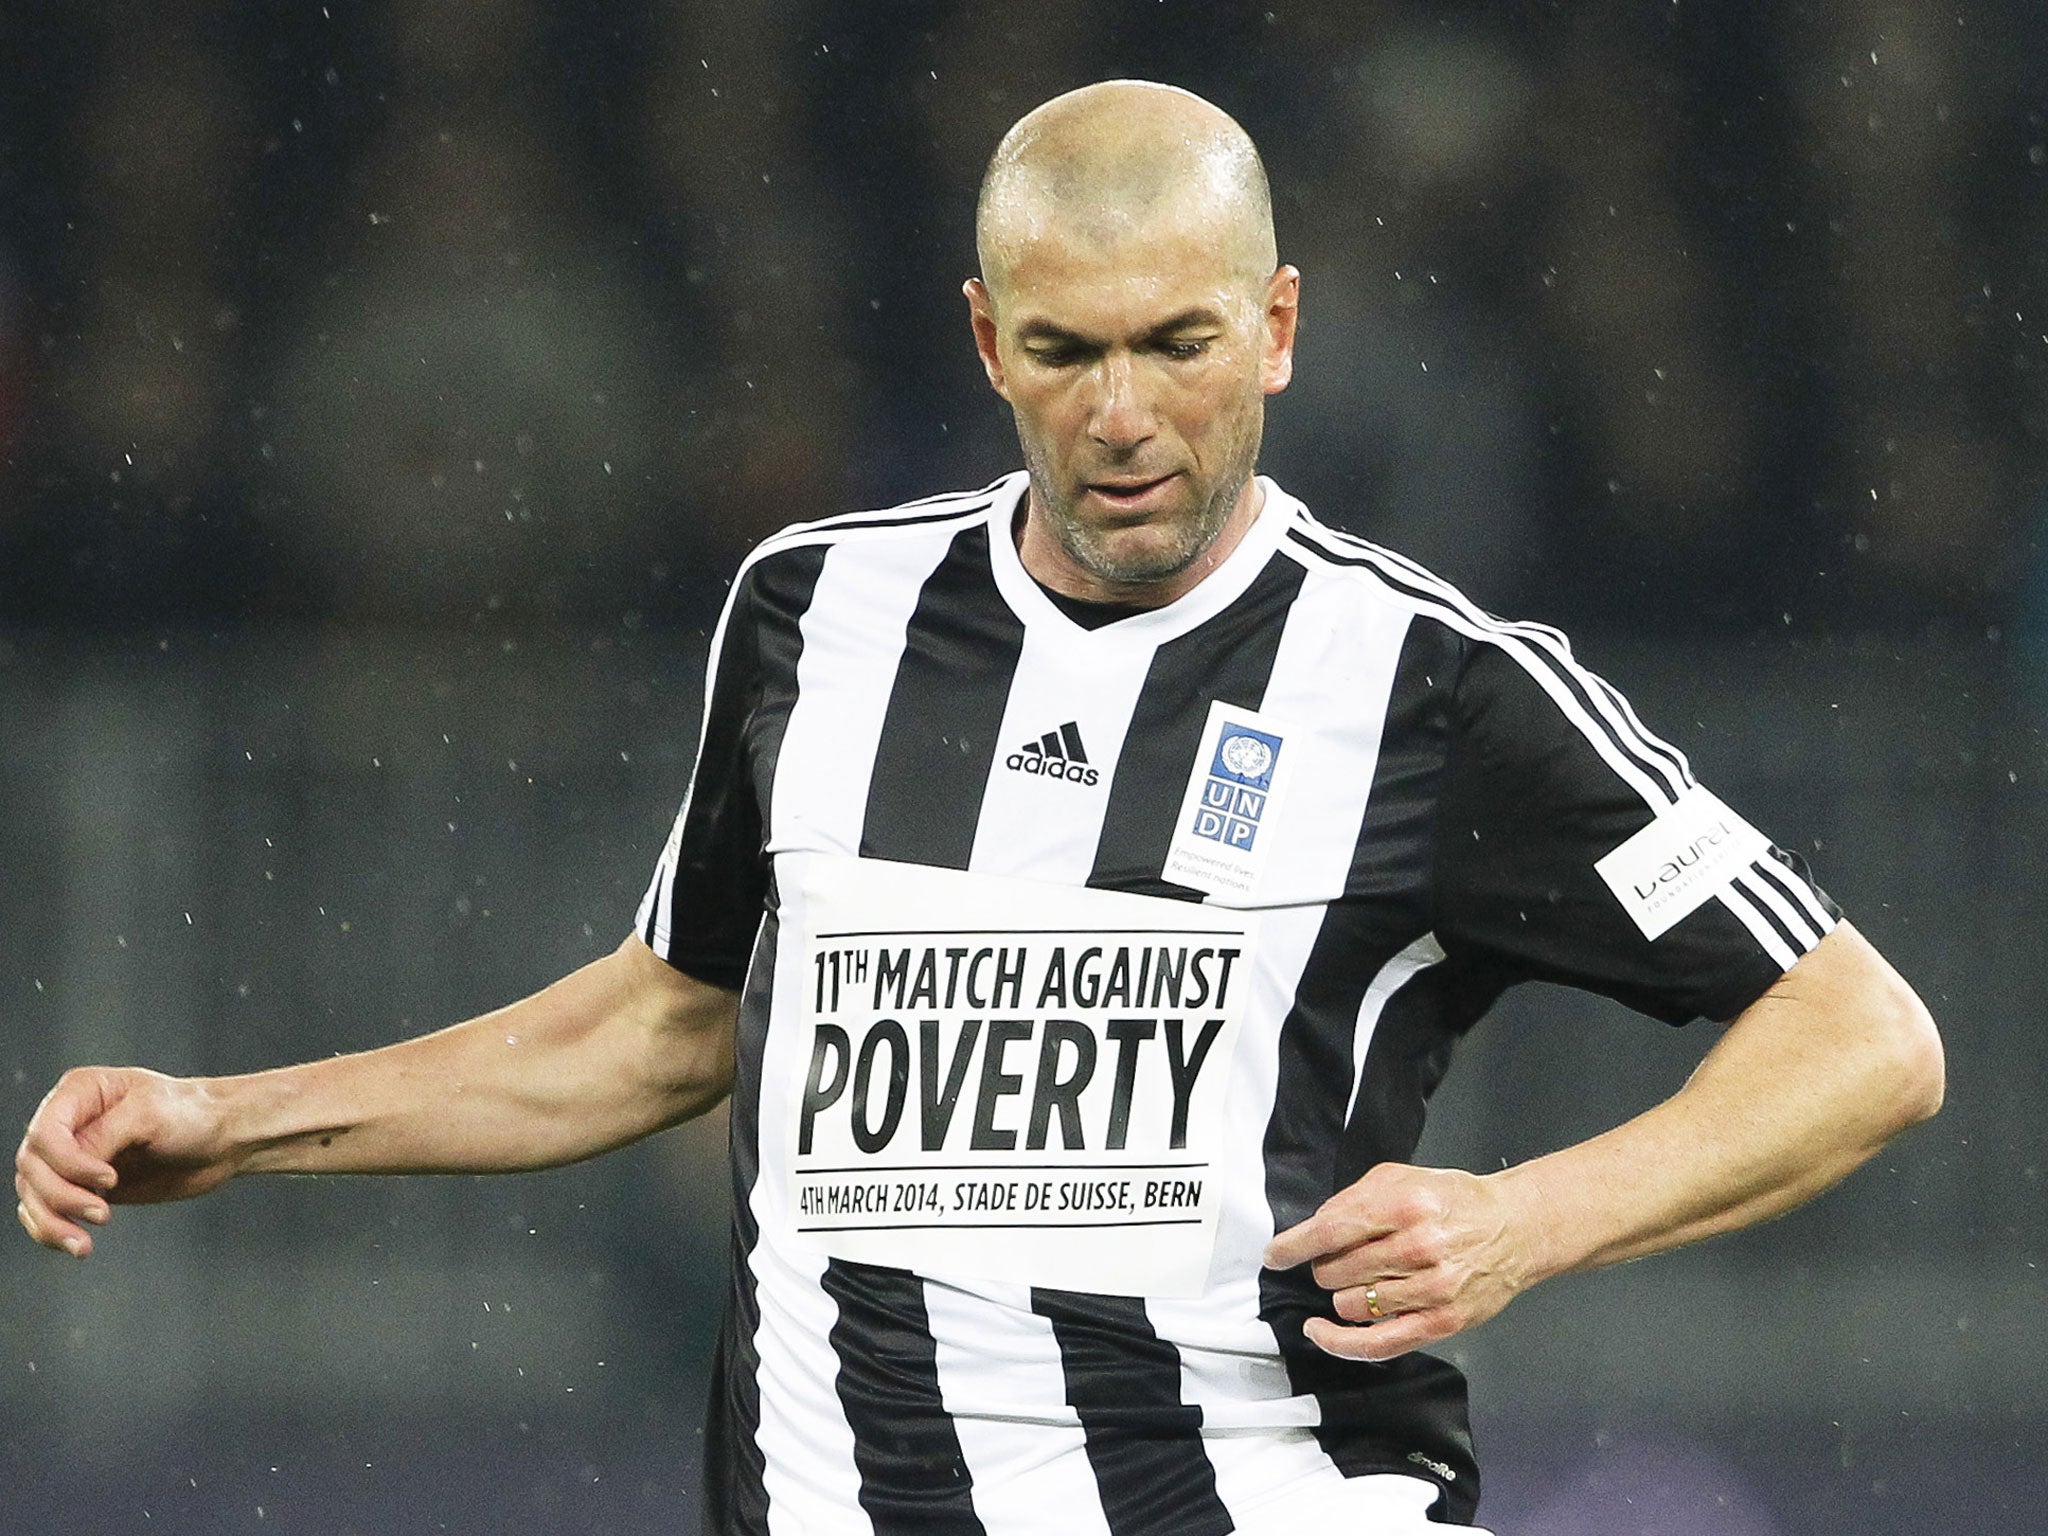 Zinedine Zidane makes a pass during the 'Match against Poverty' friendly against Young Boys